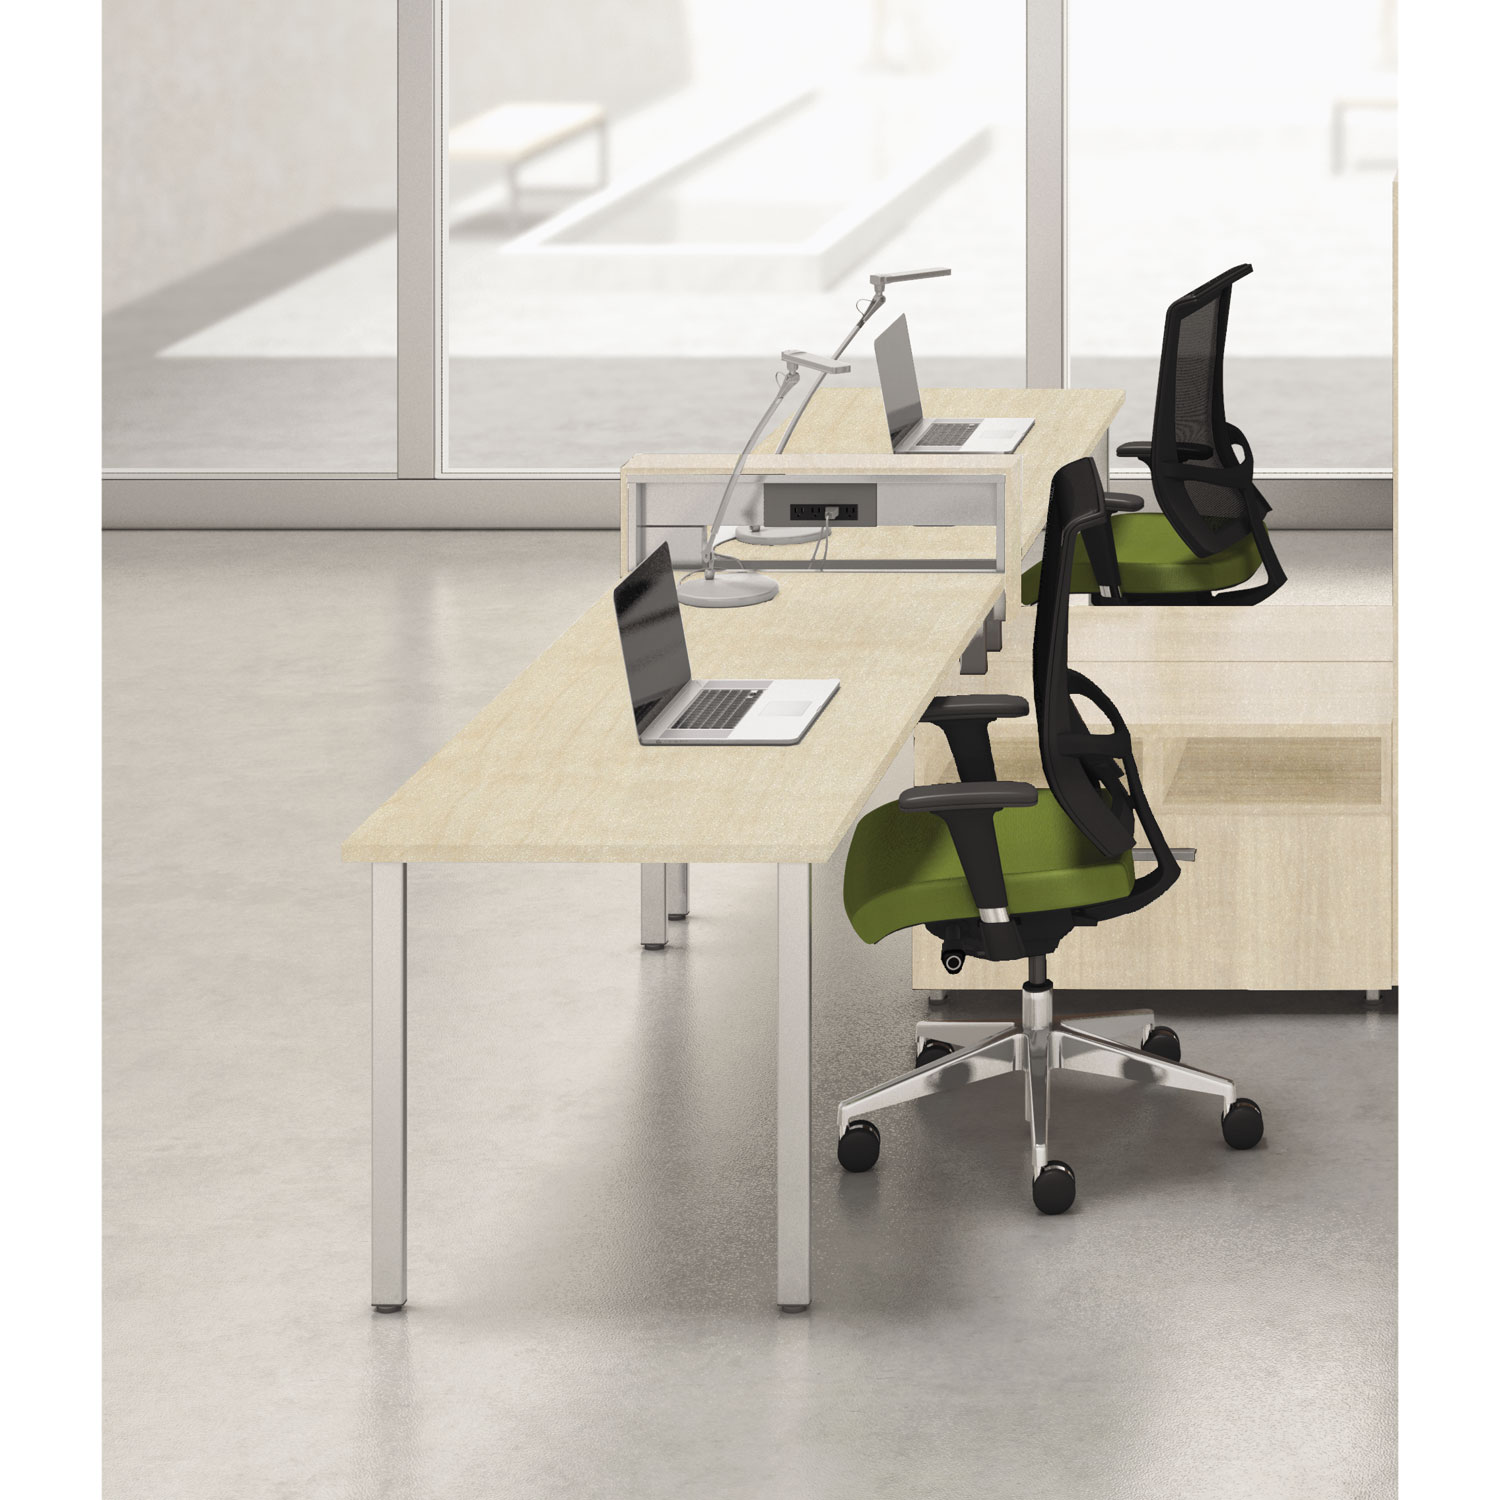 e5 Two-Person Workstation with Beltway, 123-1/2w x 73d x 29-1/2h, Summer Suede